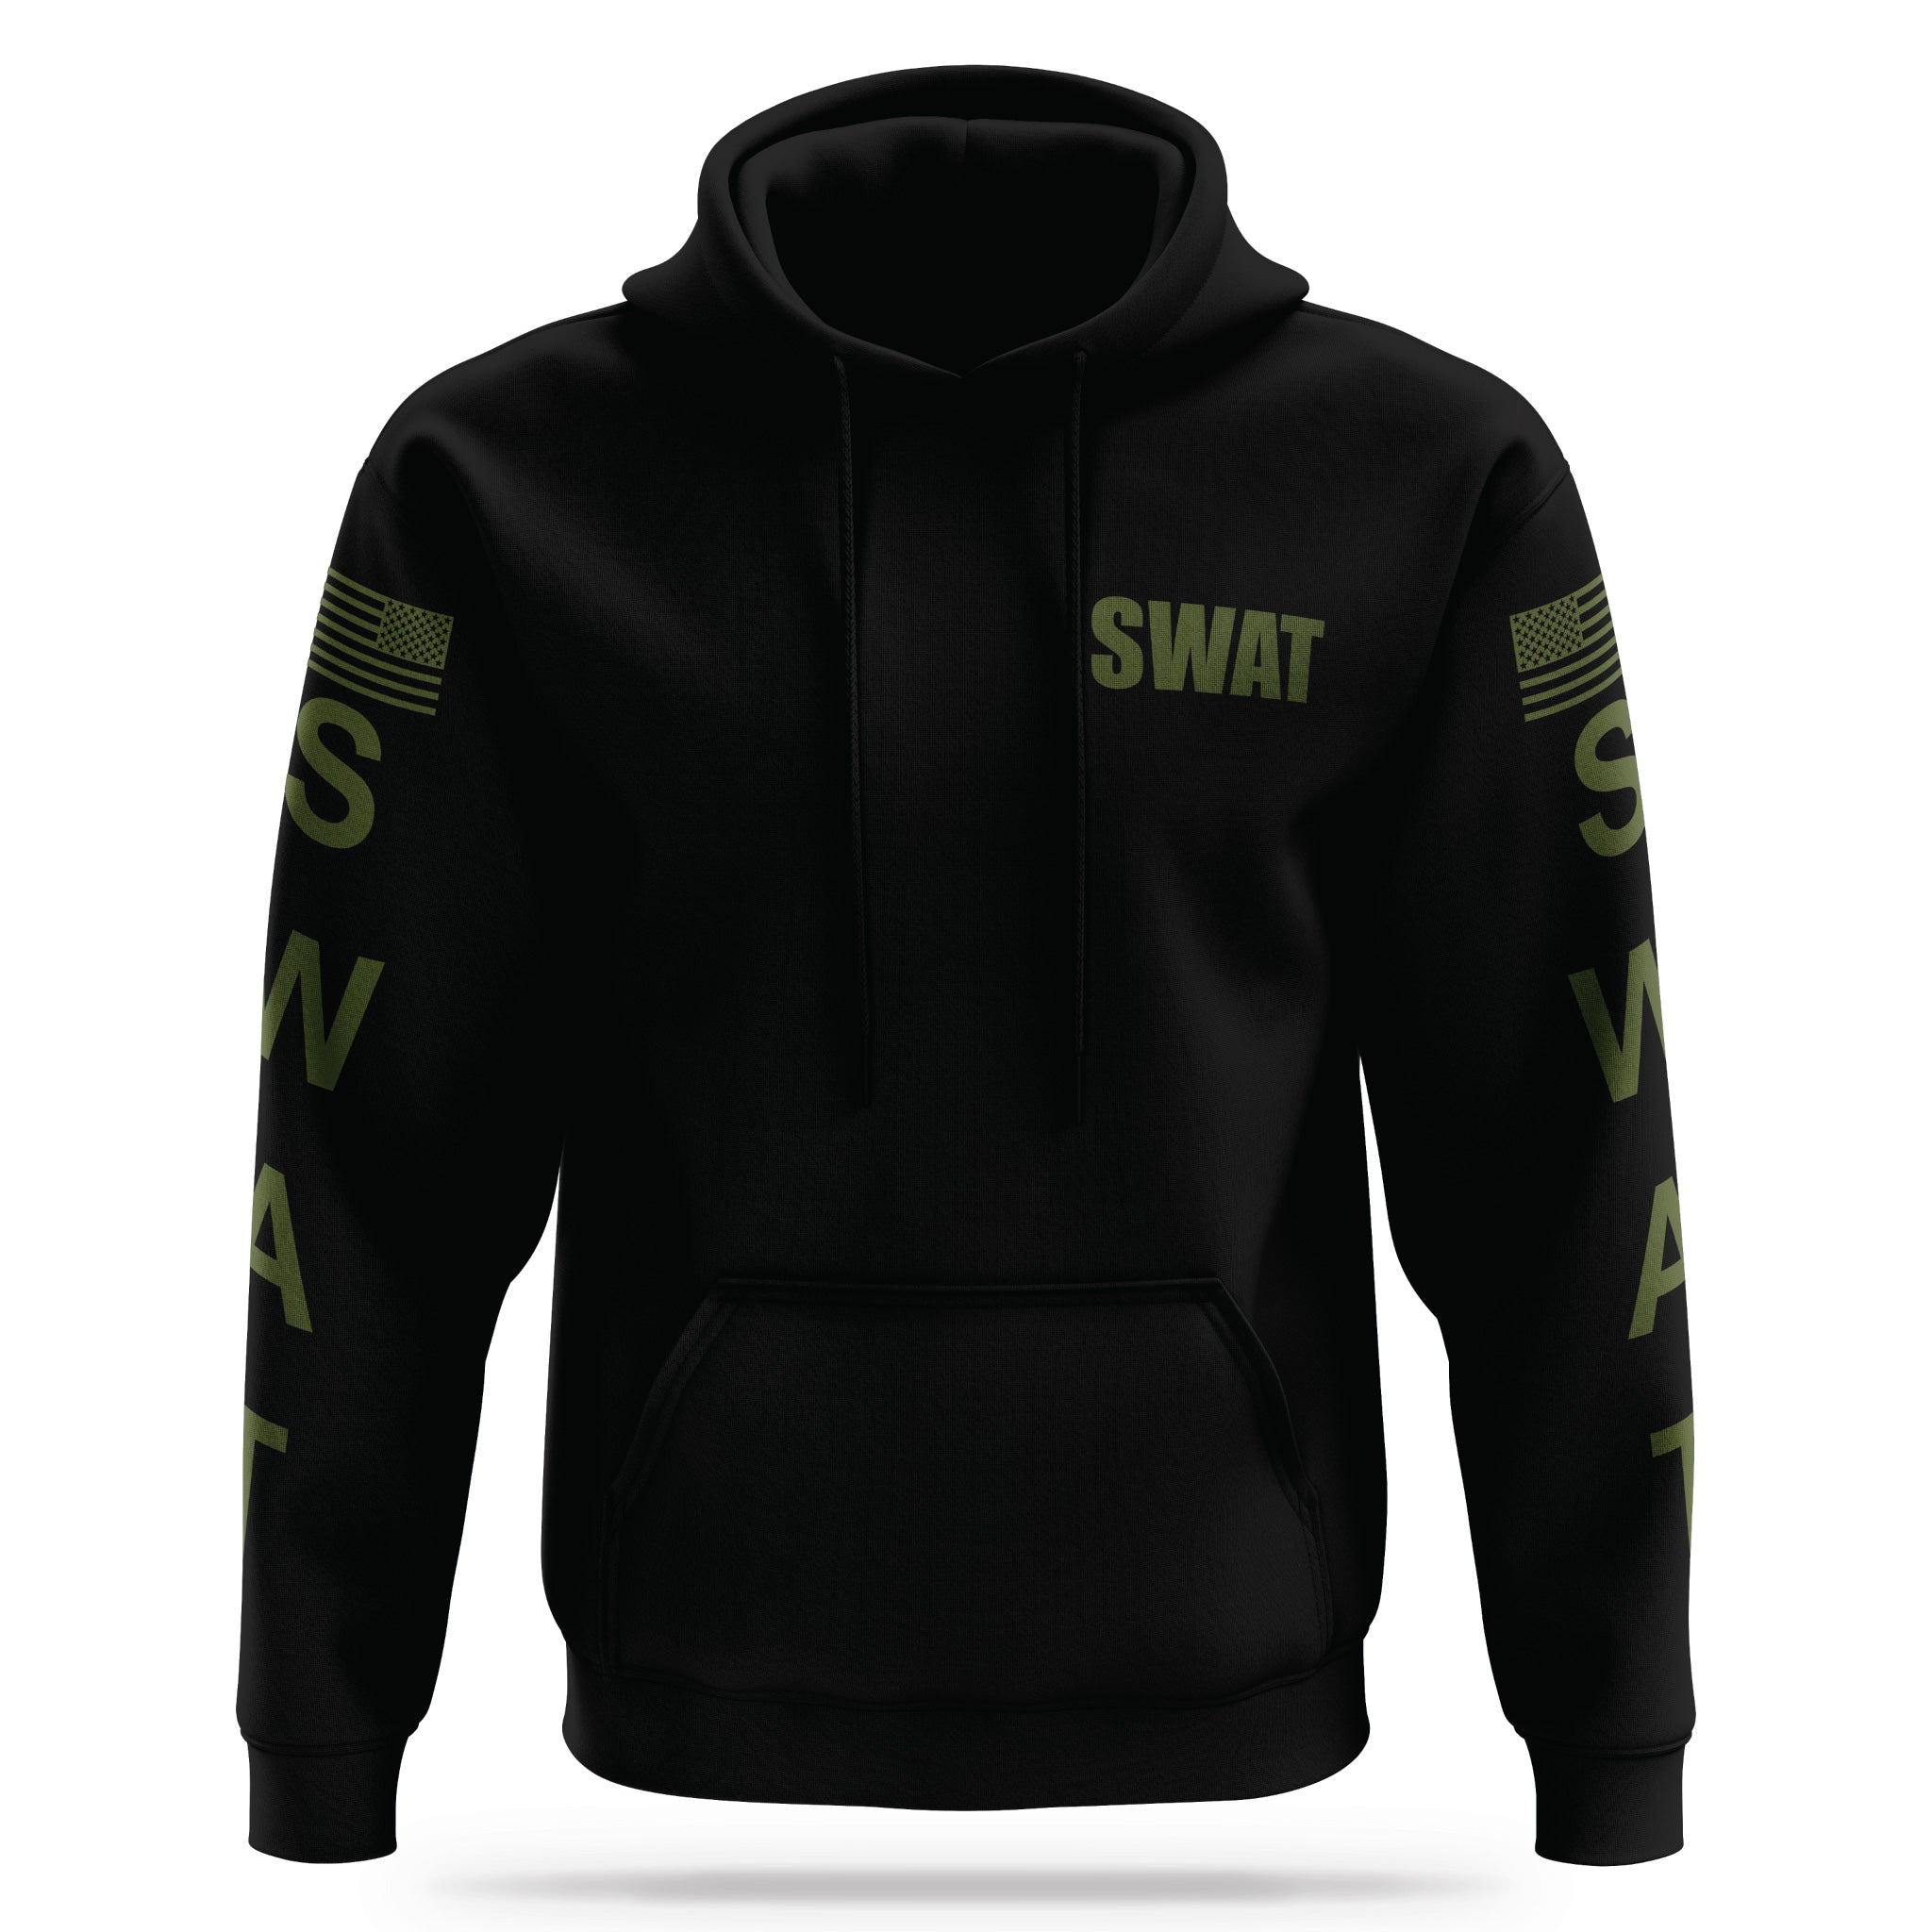 SWAT Performance Hoodie 2.0 Blk/Grn | XXXXL | Hoodie | Leo Owned & Operated Business | Designed in The USA | 13 Fifty Apparel